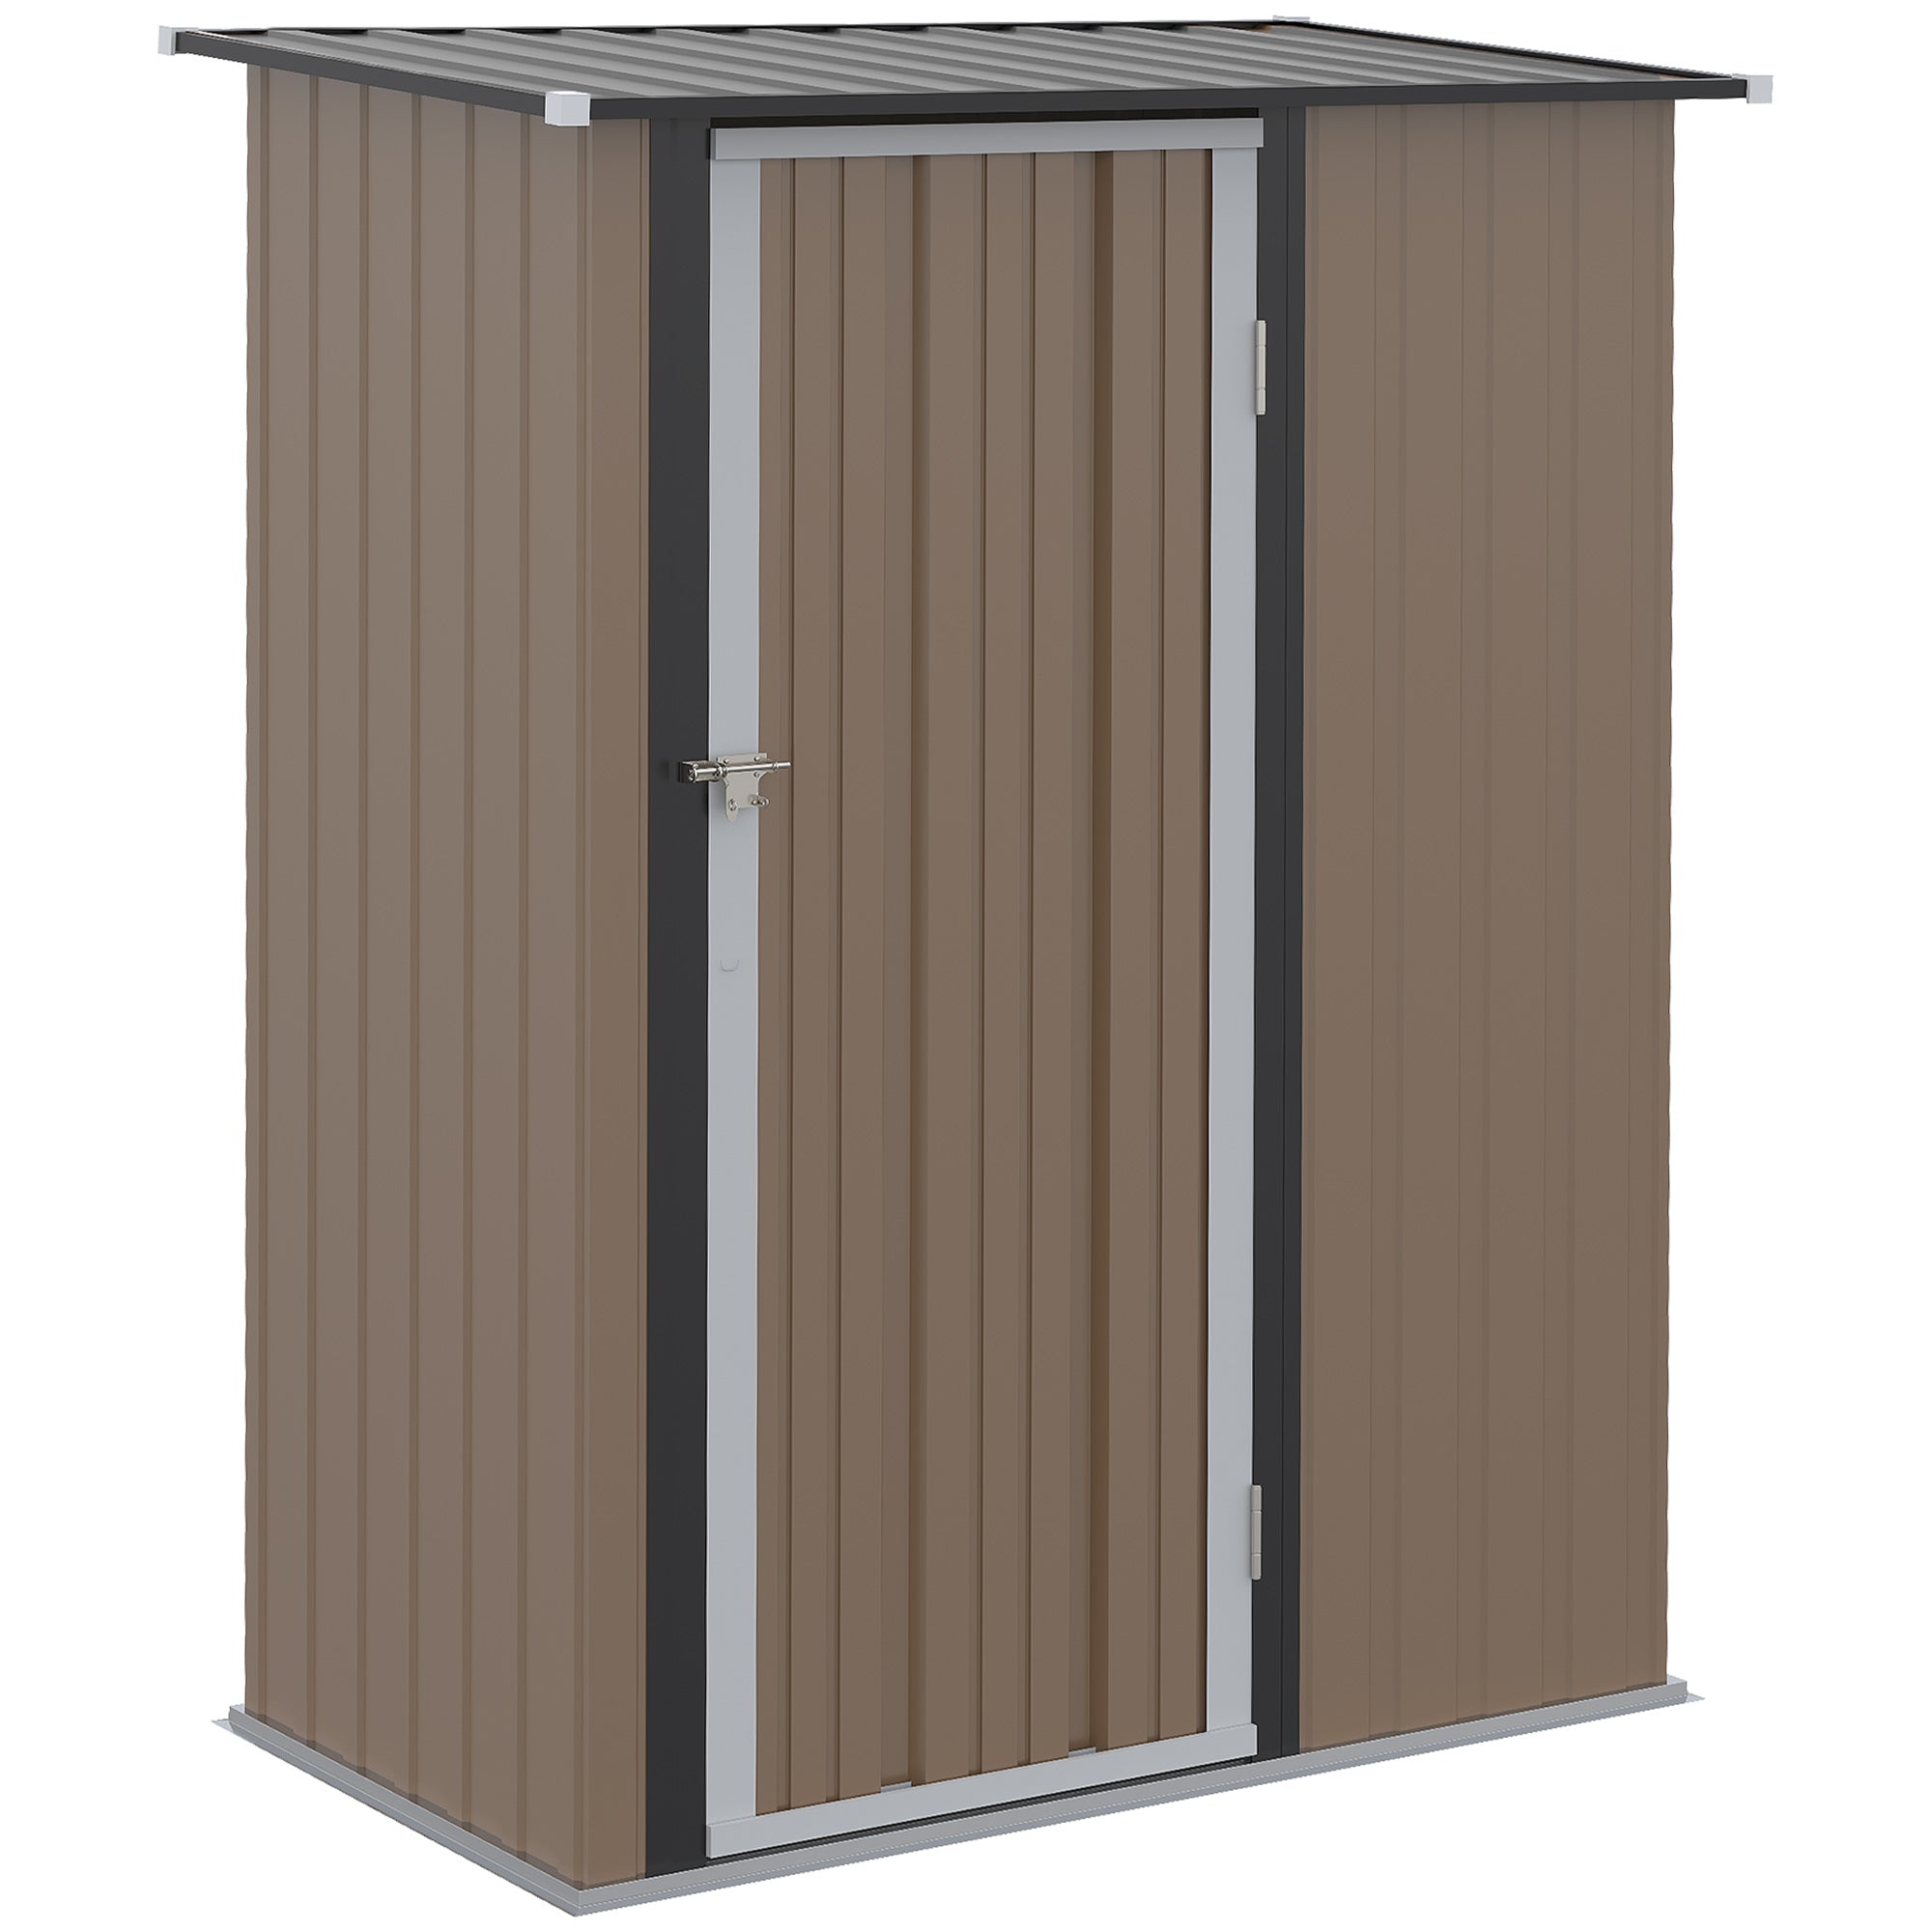 Outsunny Outdoor Storage Shed Steel Garden Shed with Lockable Door Brown  | TJ Hughes